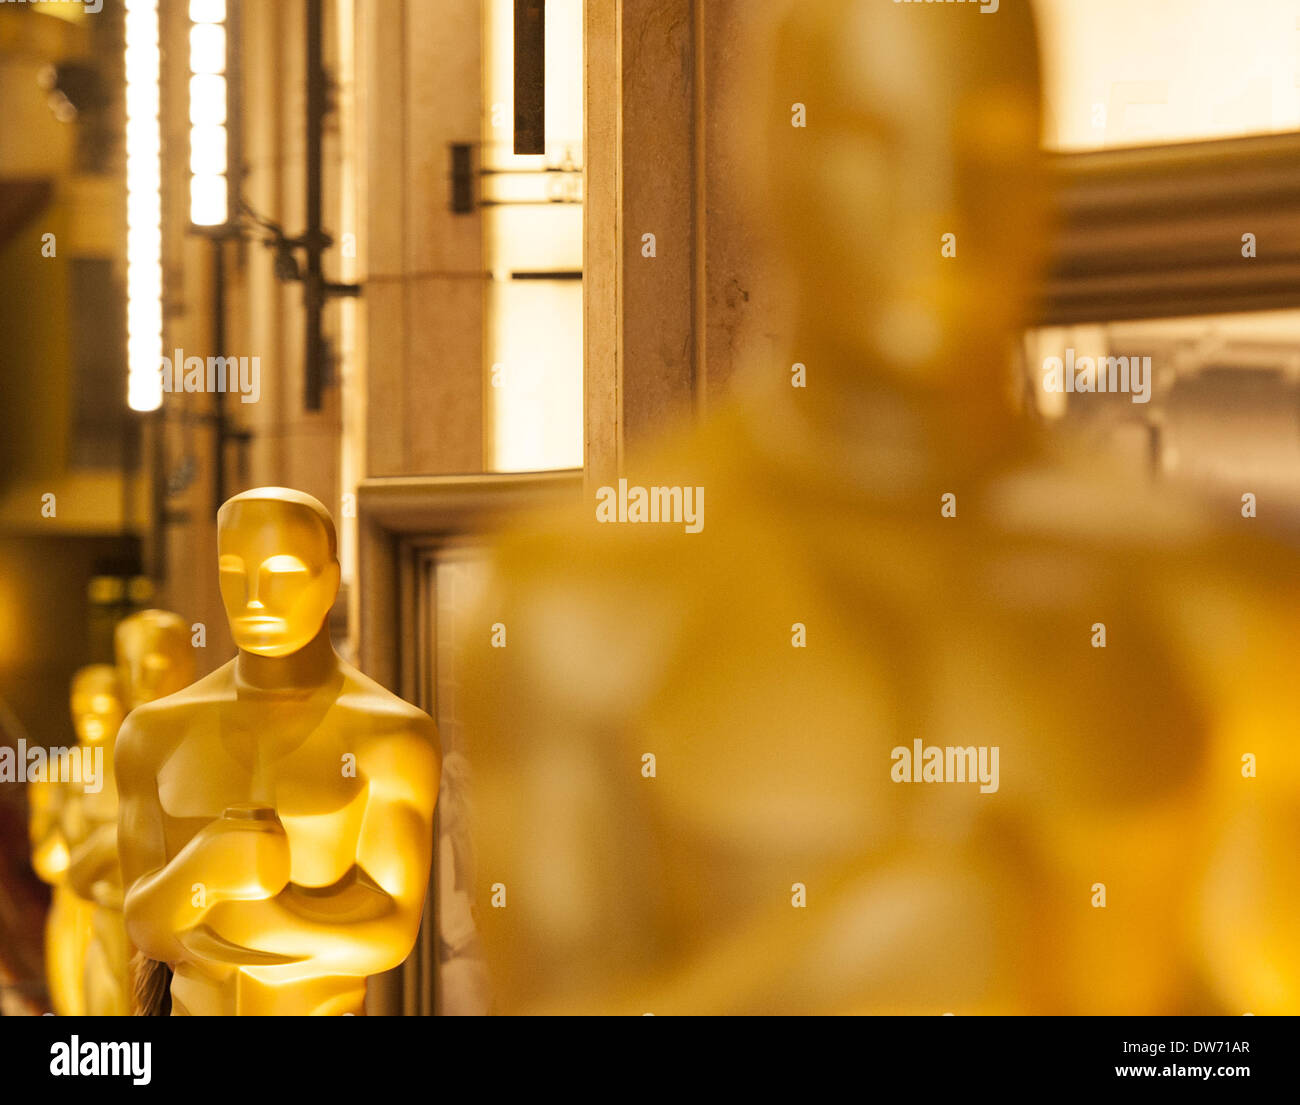 March 1, 2014 - Hollywood/Los Angeles, California, USA - A line of gold Oscars could be seen set up along the main entrance hall of the Dolby Theatre in Hollywood. Preparations for the Oscars scheduled for Sunday March 2, 2014, continued on Saturday in anticipation of what could be a wet and stormy Oscar event. Work continued on the red carpet arrival area after two days of stormy weather left soggy displays, carpet and bleachers despite large tents assembled with thick clear plastic in order to keep celebrities, nominees, presenters and guests dry on Sunday. Media representatives includin Stock Photo